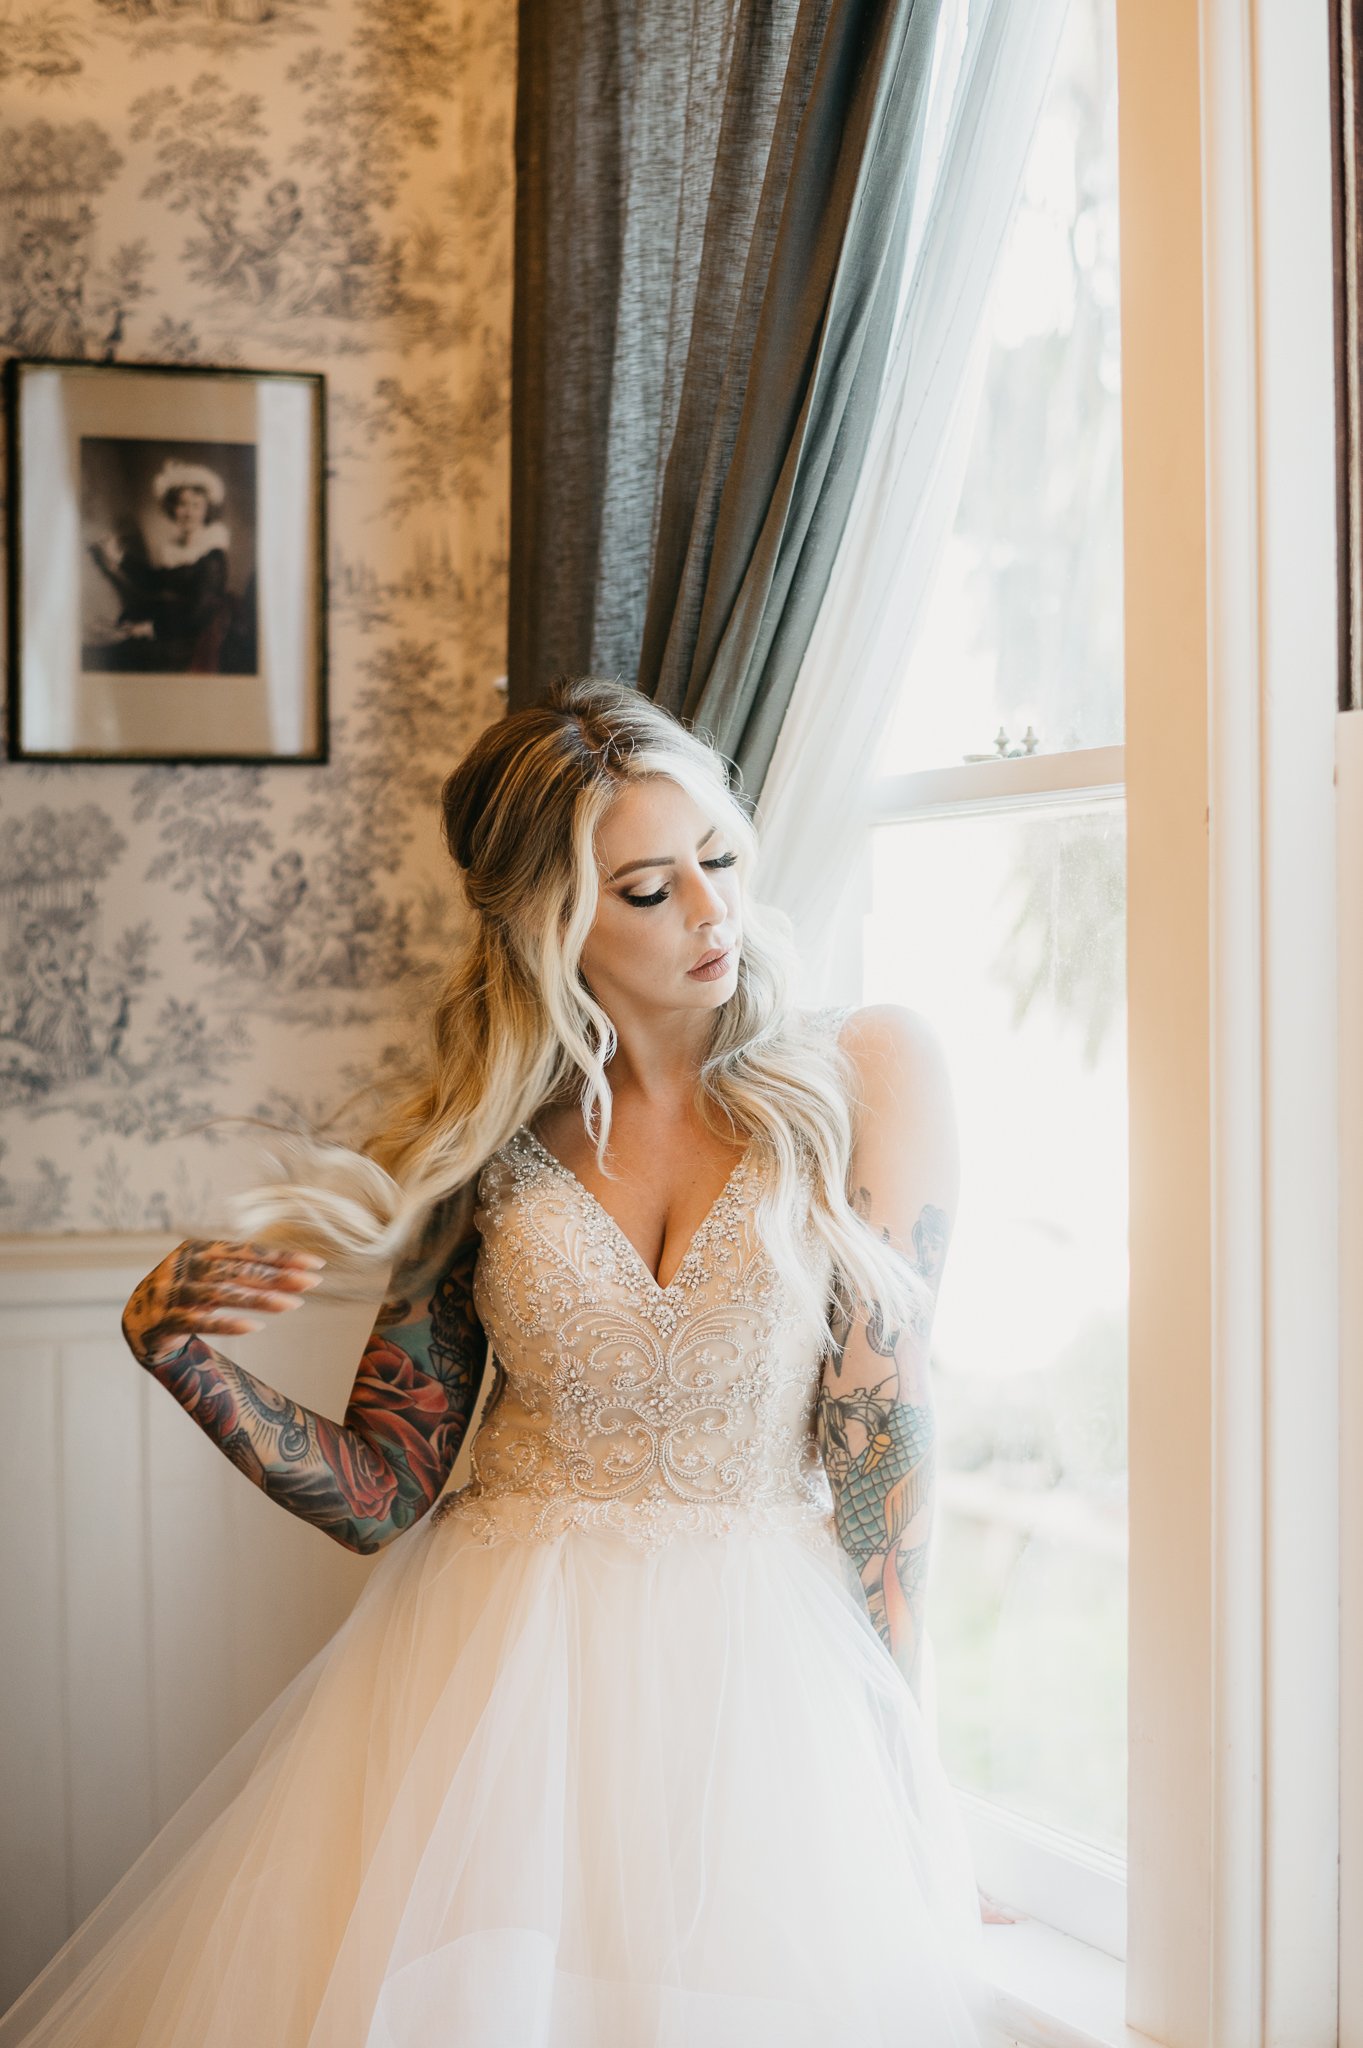 bride in wedding attire standing beside a window with sunlight shining through, she is looking down and has her fingers in the ends of her hair.